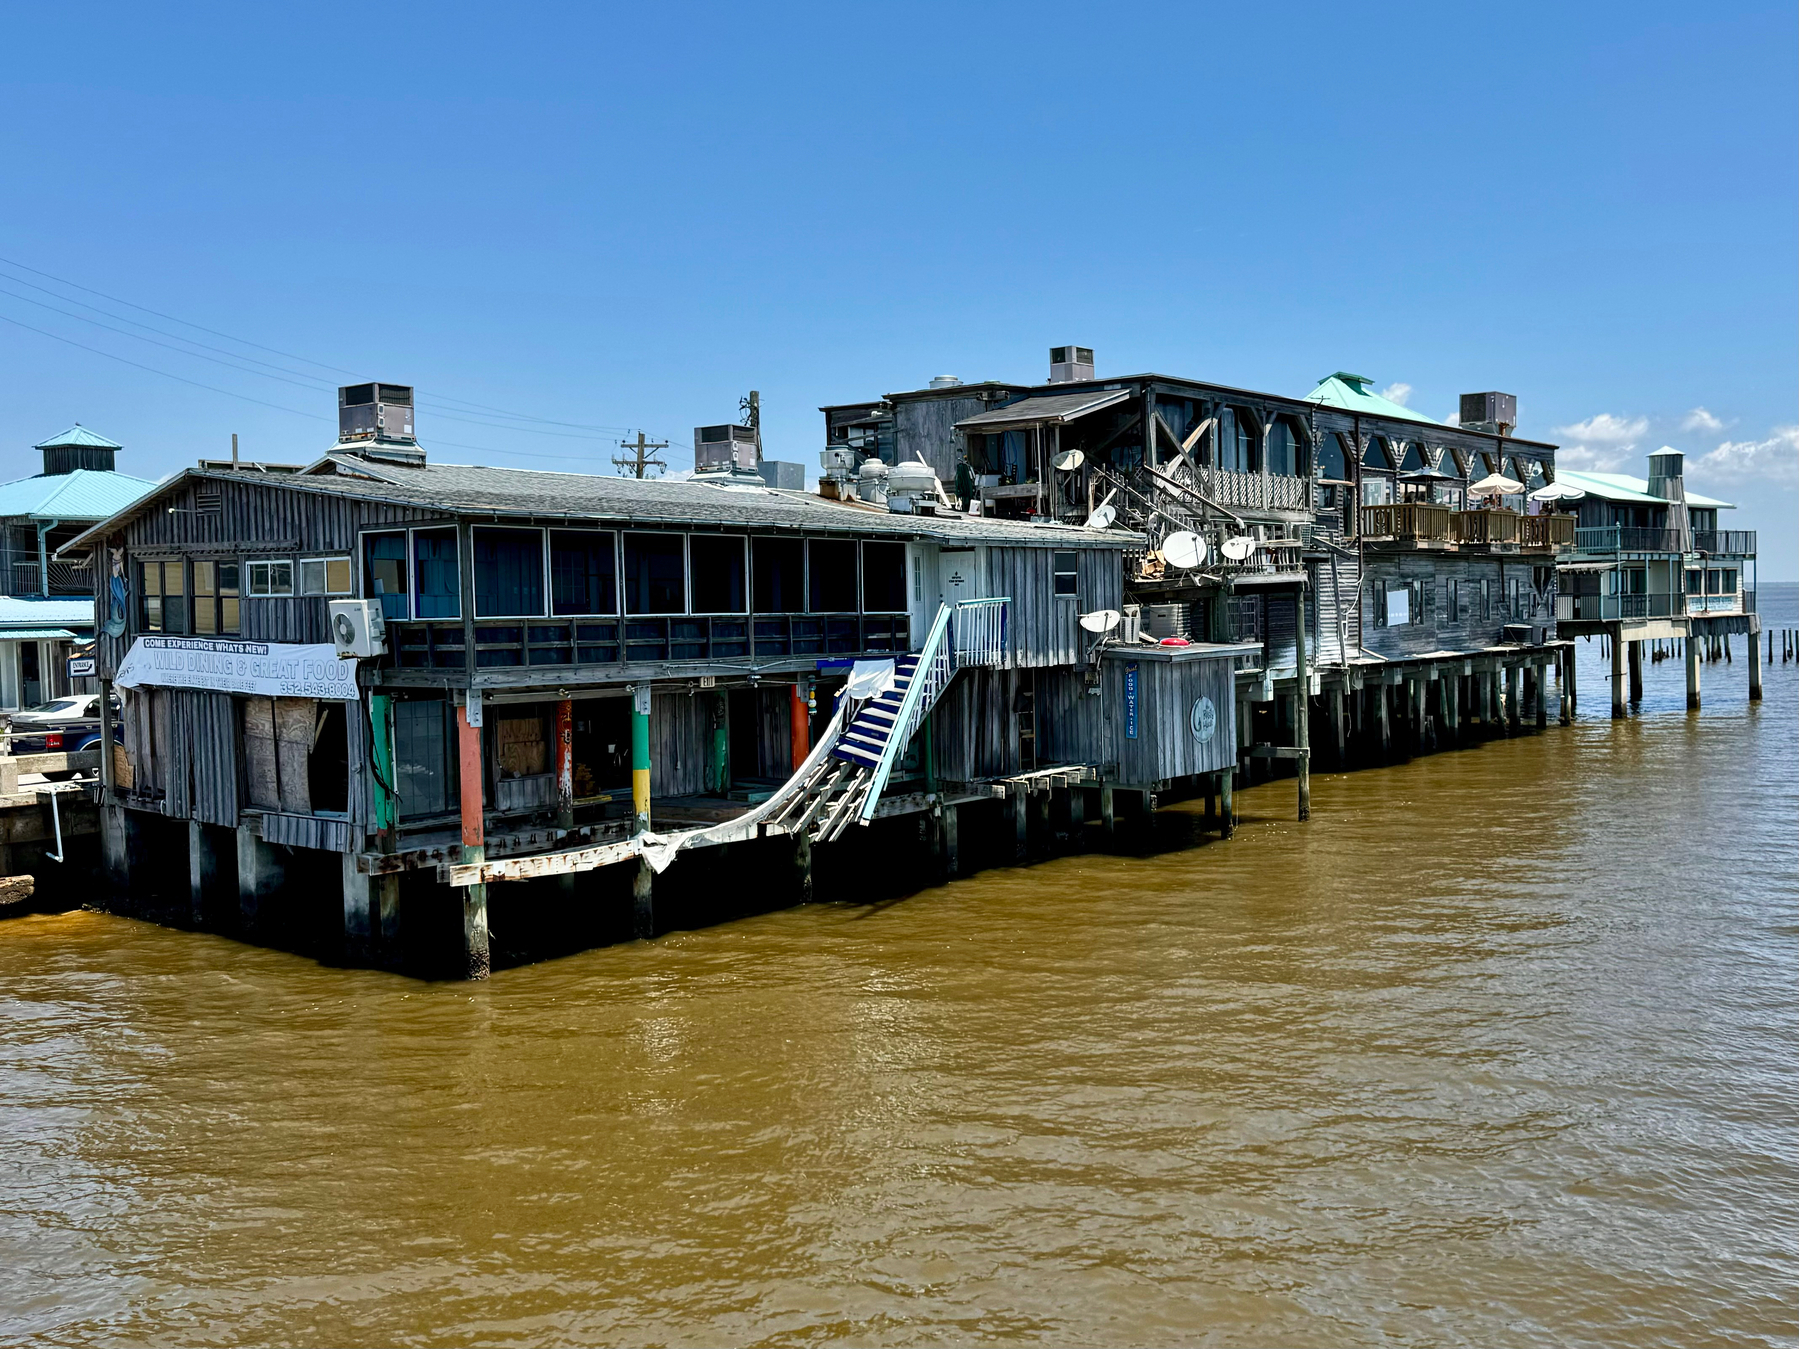 Wooden buildings on stilts over a muddy body of water, featuring balconies, stairs, and various satellite dishes and air conditioning units.